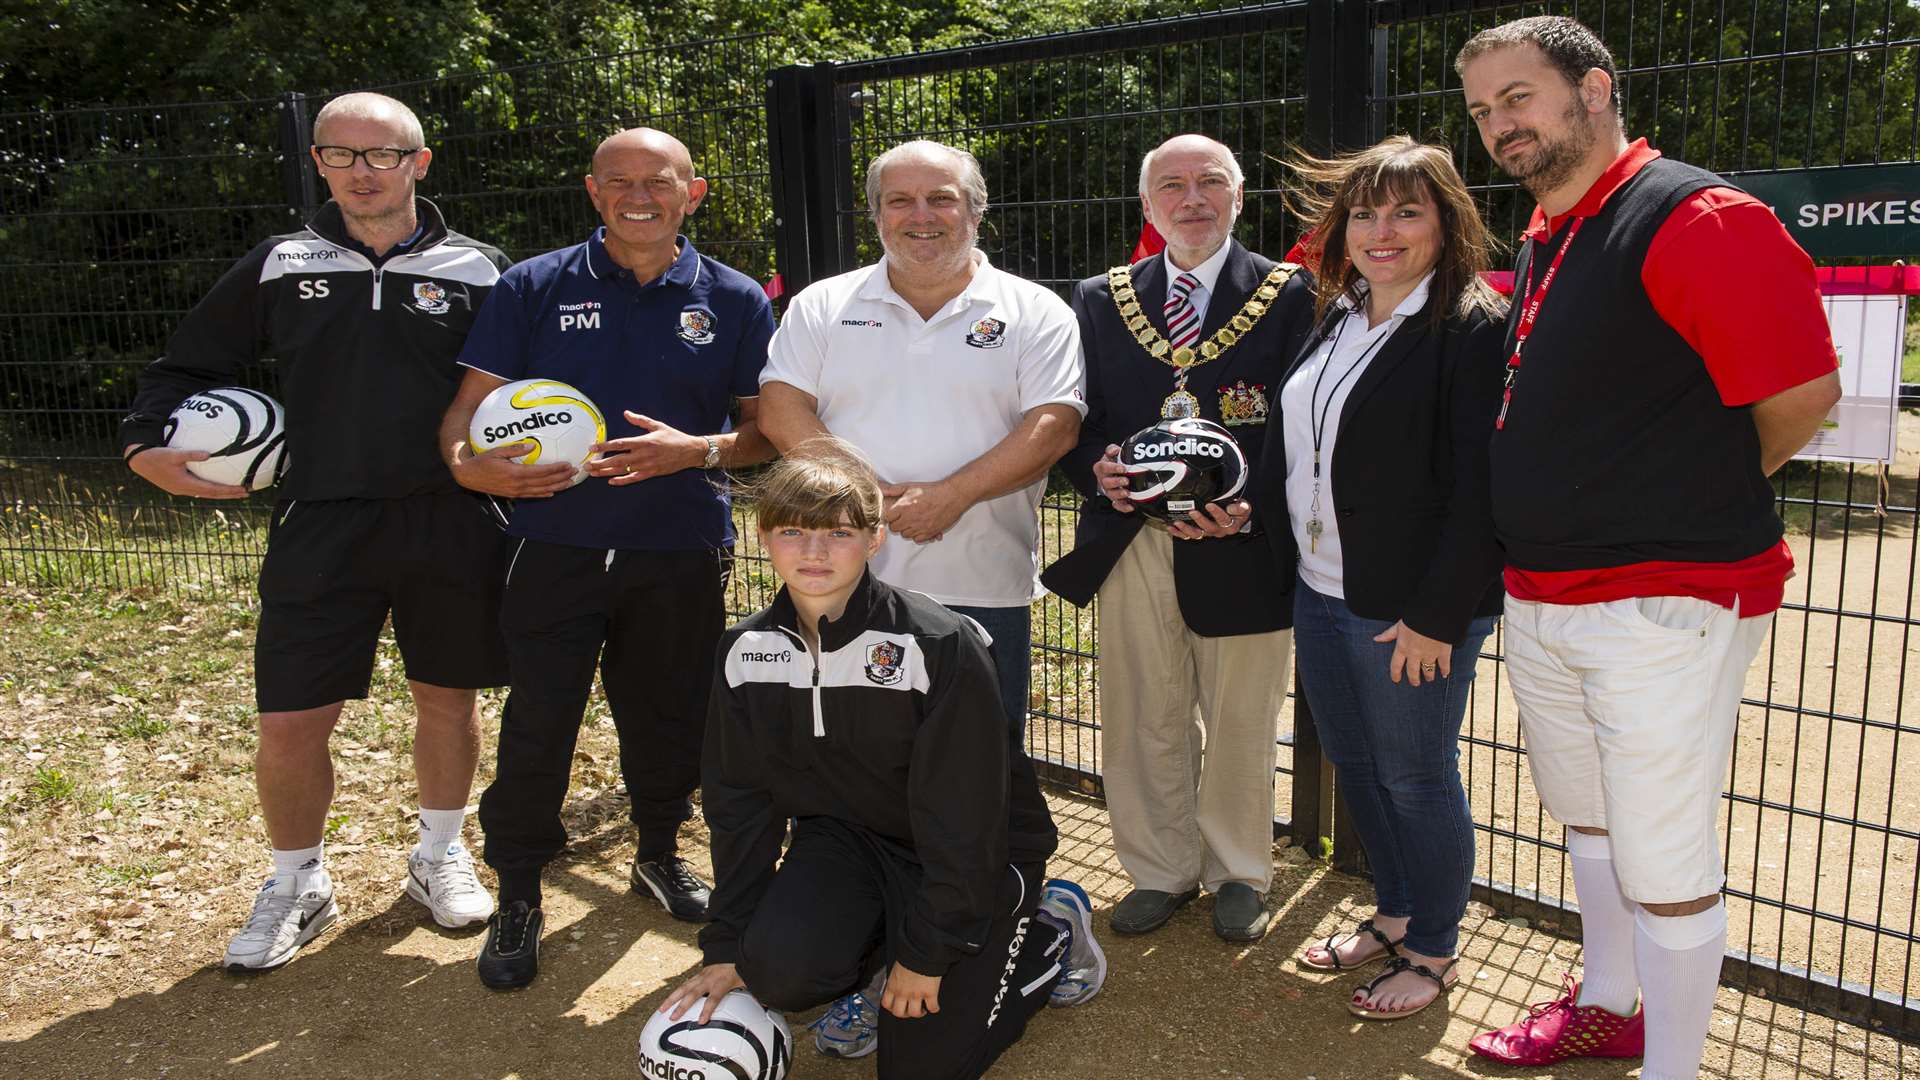 The launch of Footgolf at the club is another thing on offer to the community.